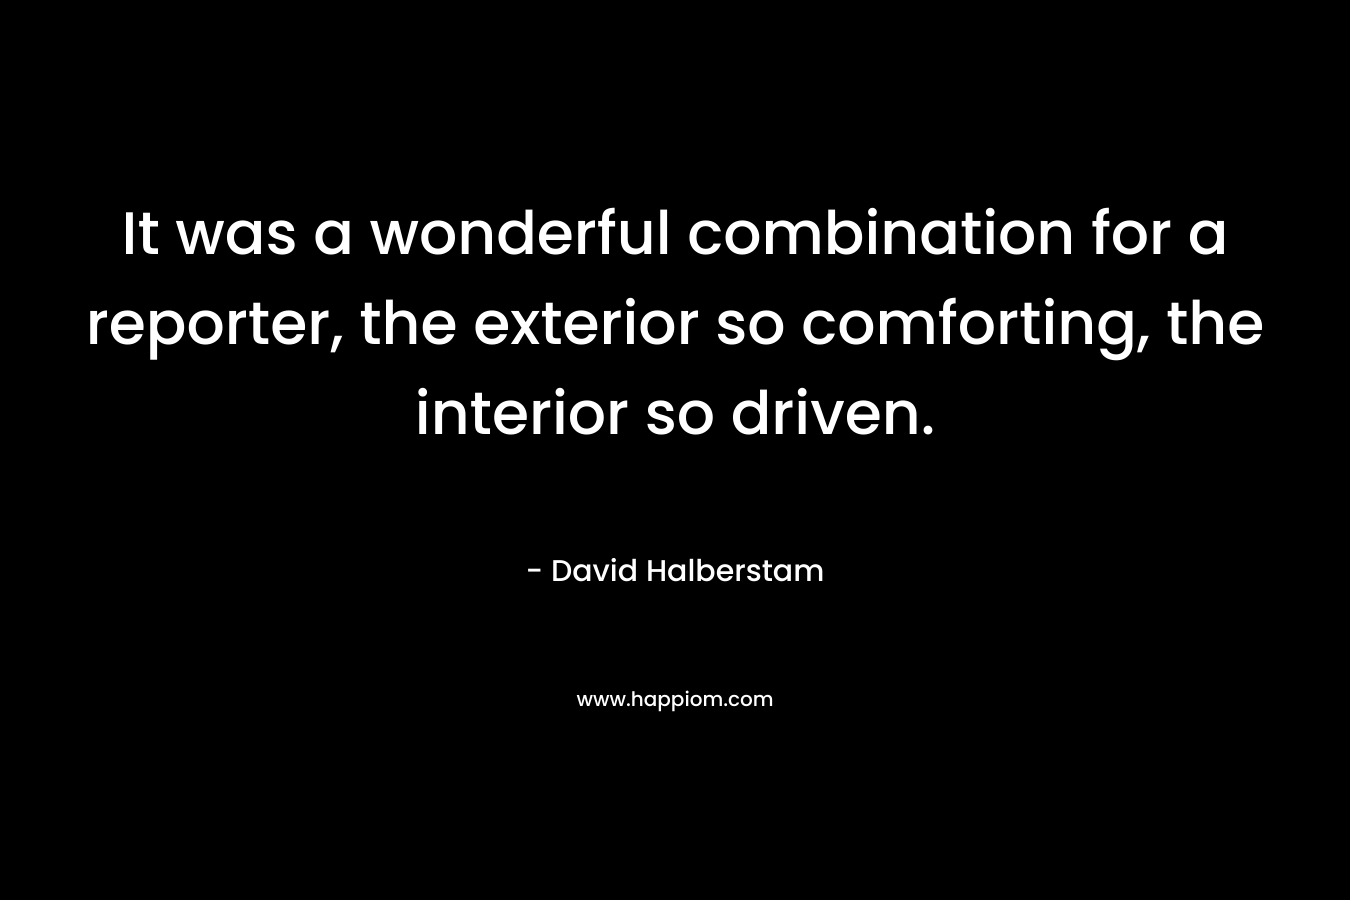 It was a wonderful combination for a reporter, the exterior so comforting, the interior so driven. – David Halberstam